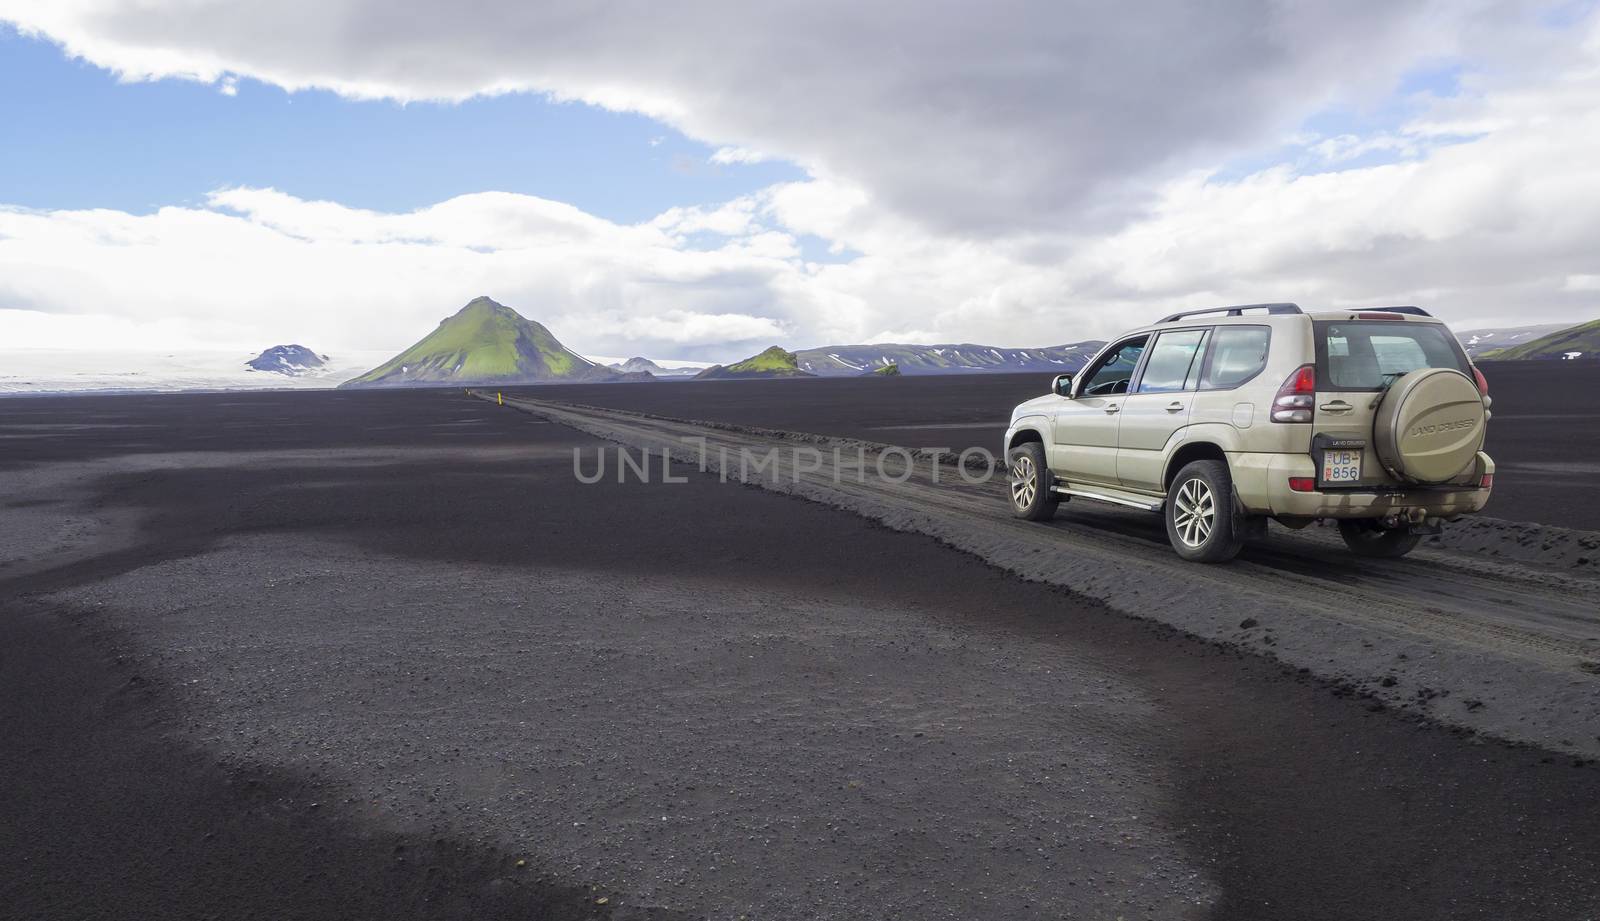 South Iceland, Nature reserve Fjallabak, July 7, 2018: Off road car Toyota Landcruiser driving on dirt mountain road F210 through black lava sand desert with green Maelifell mountain and myrdalsjokull glacier, blue sky white clouds